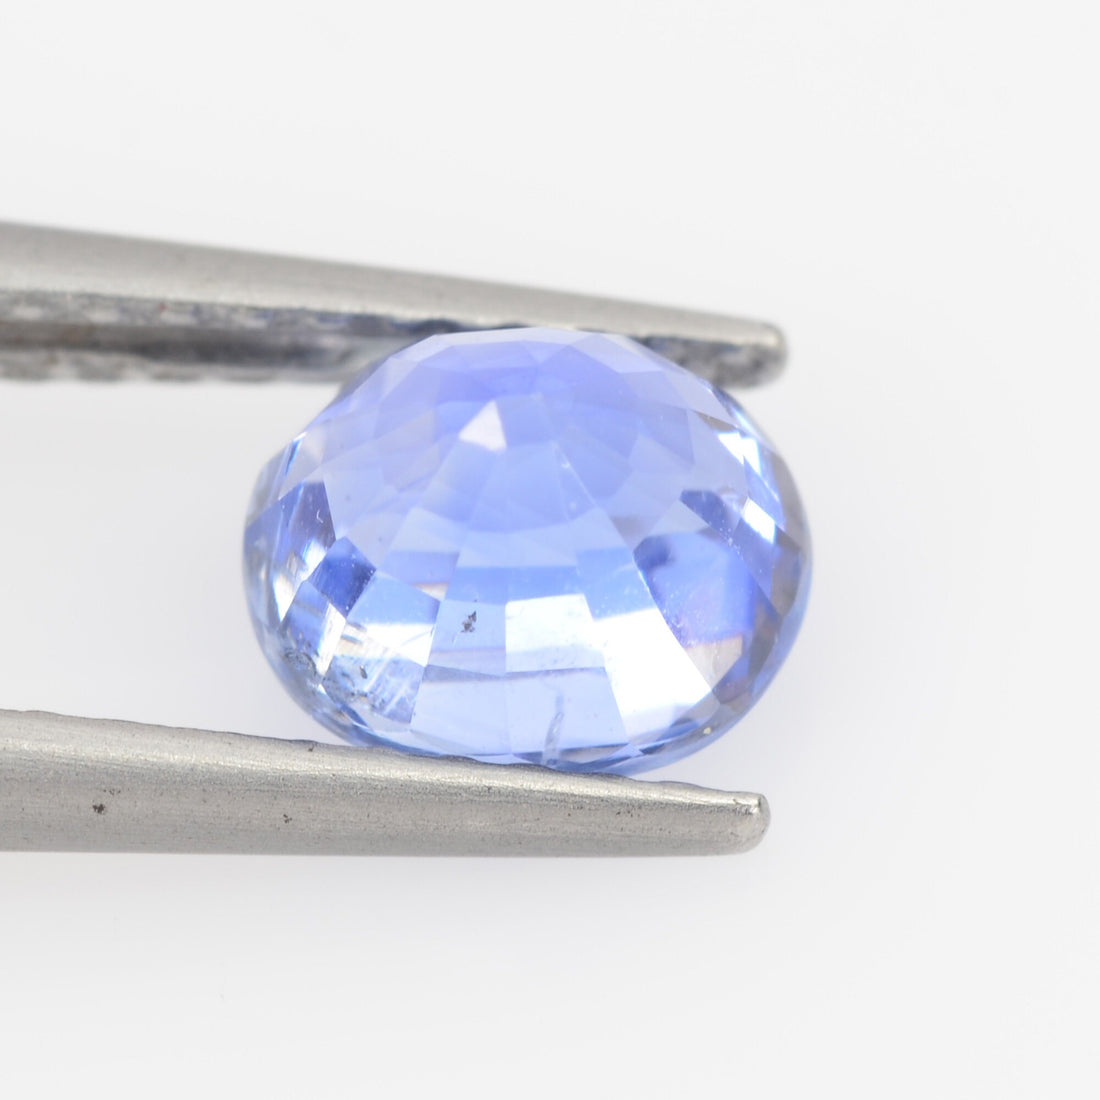 1.31 cts Natural Blue Sapphire Loose Gemstone Oval Cut